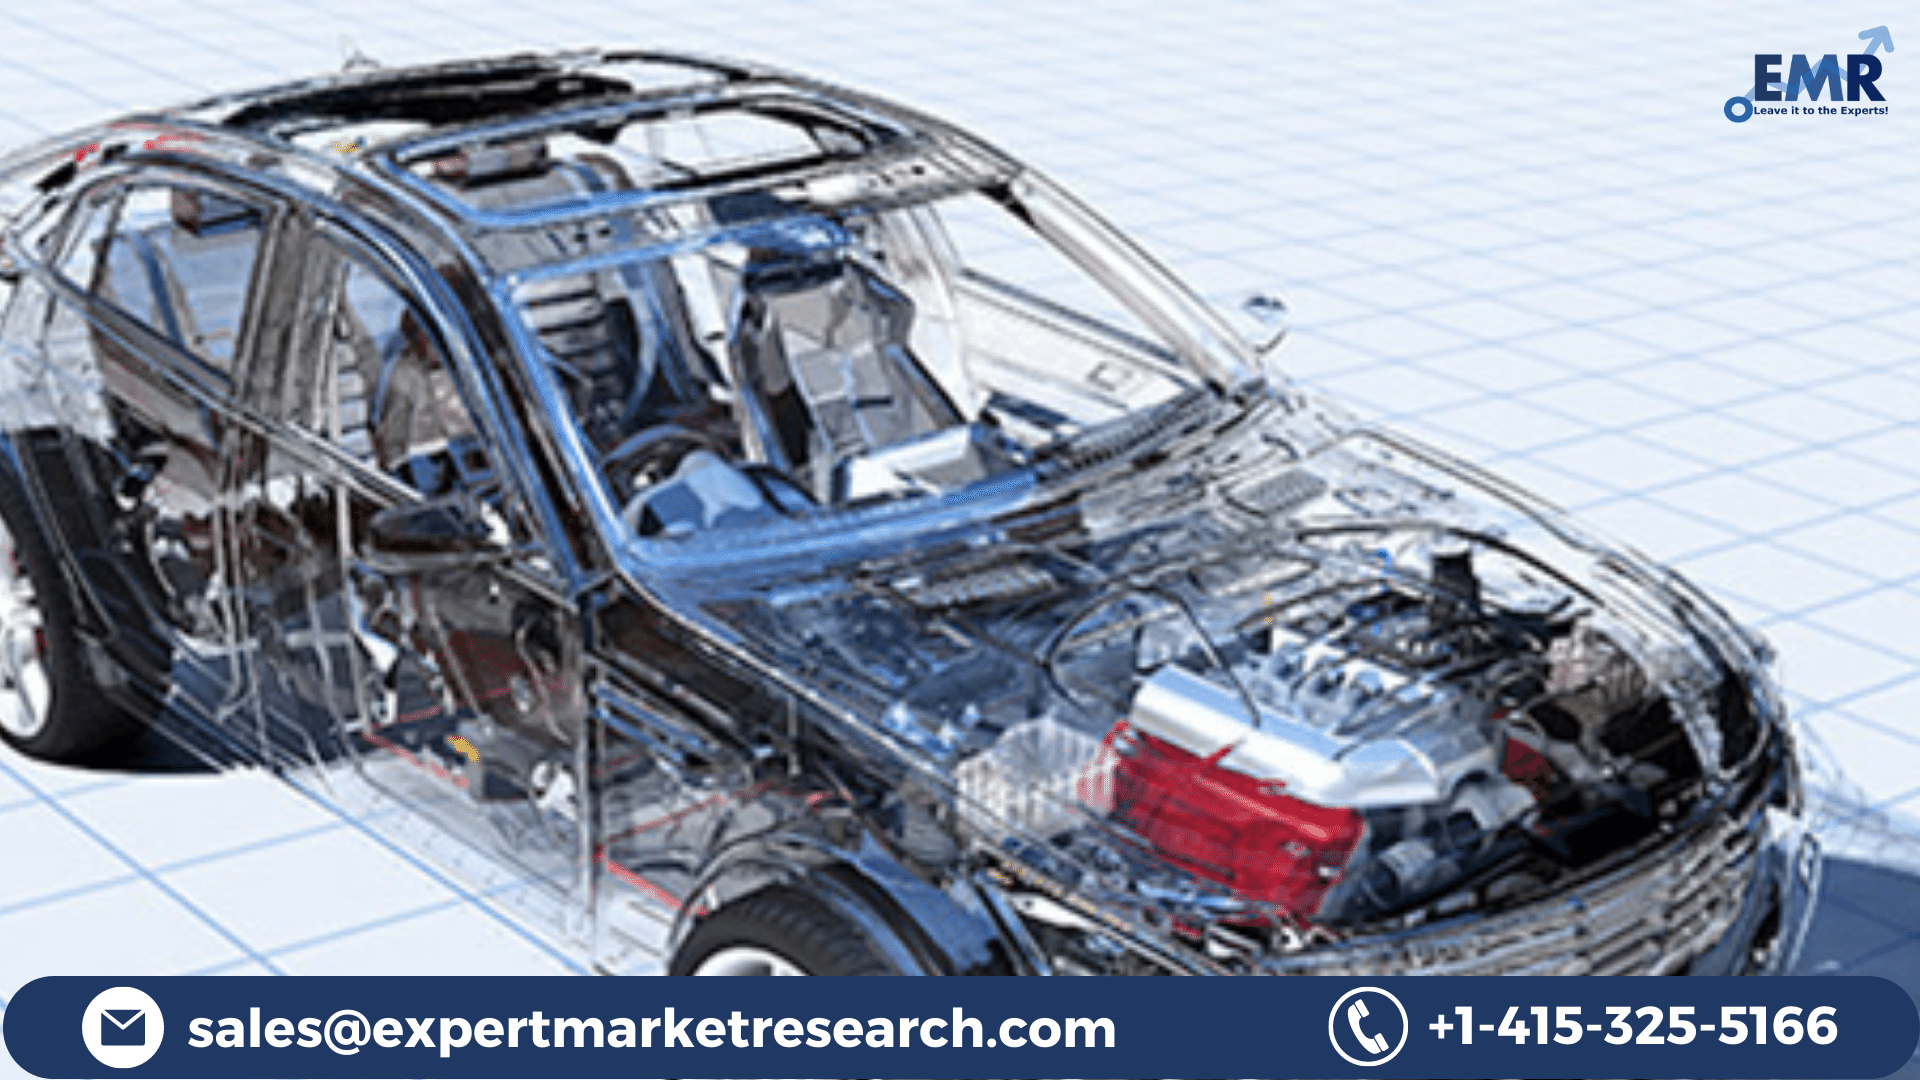 Global Automotive Microcontrollers Market Size, Share, Price, Trends, Growth, Analysis, Key Players, Report, Forecast 2022-2027